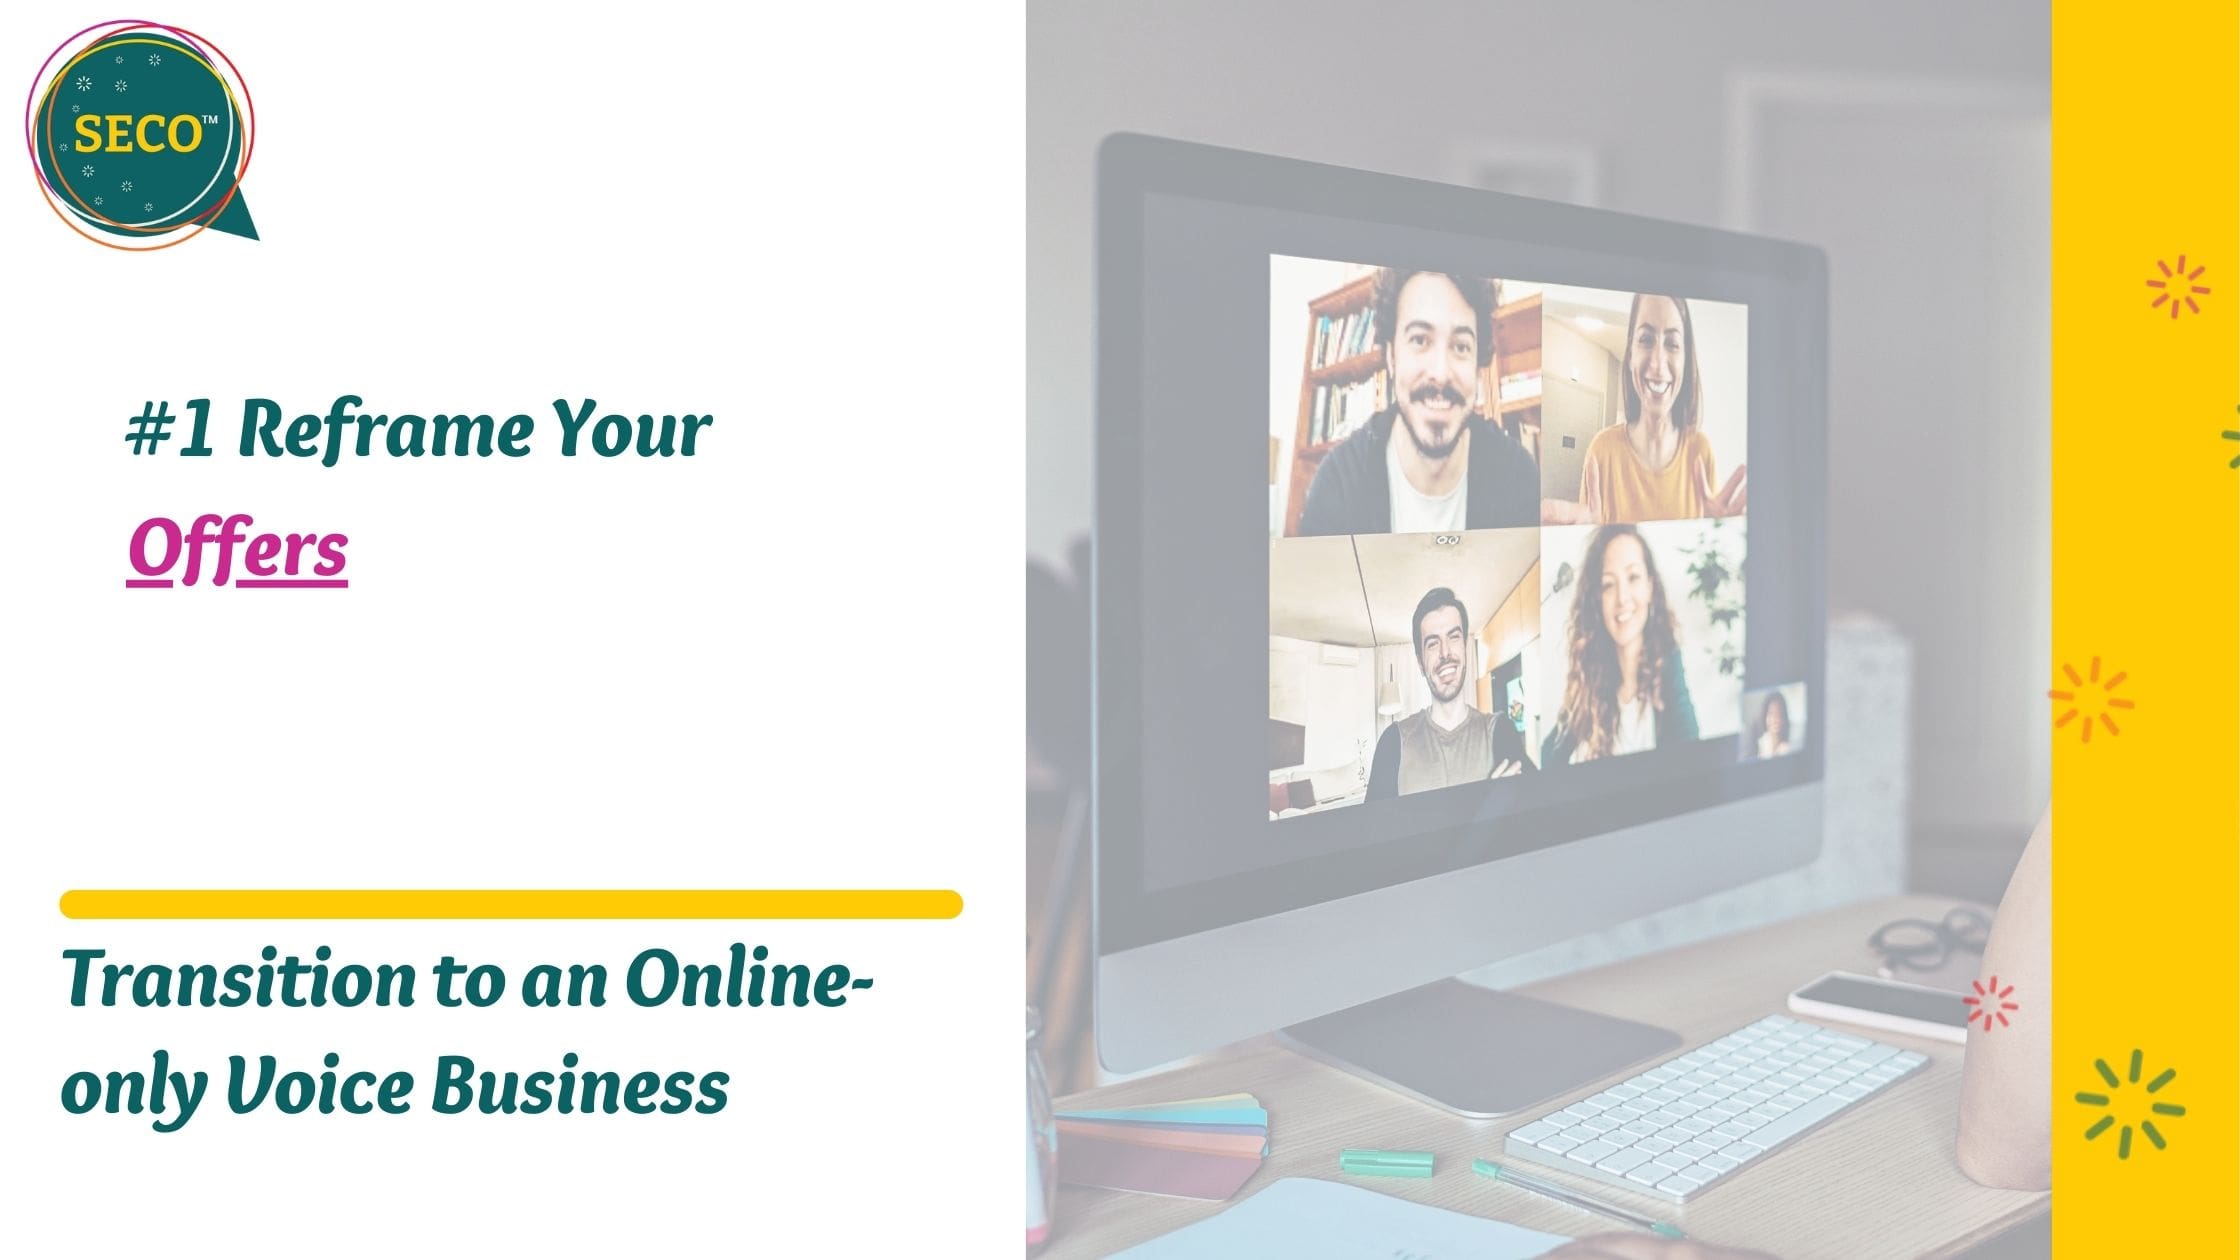 How to Transition to an Online-only Voice Business: Step #1 Reframe Your Offers.